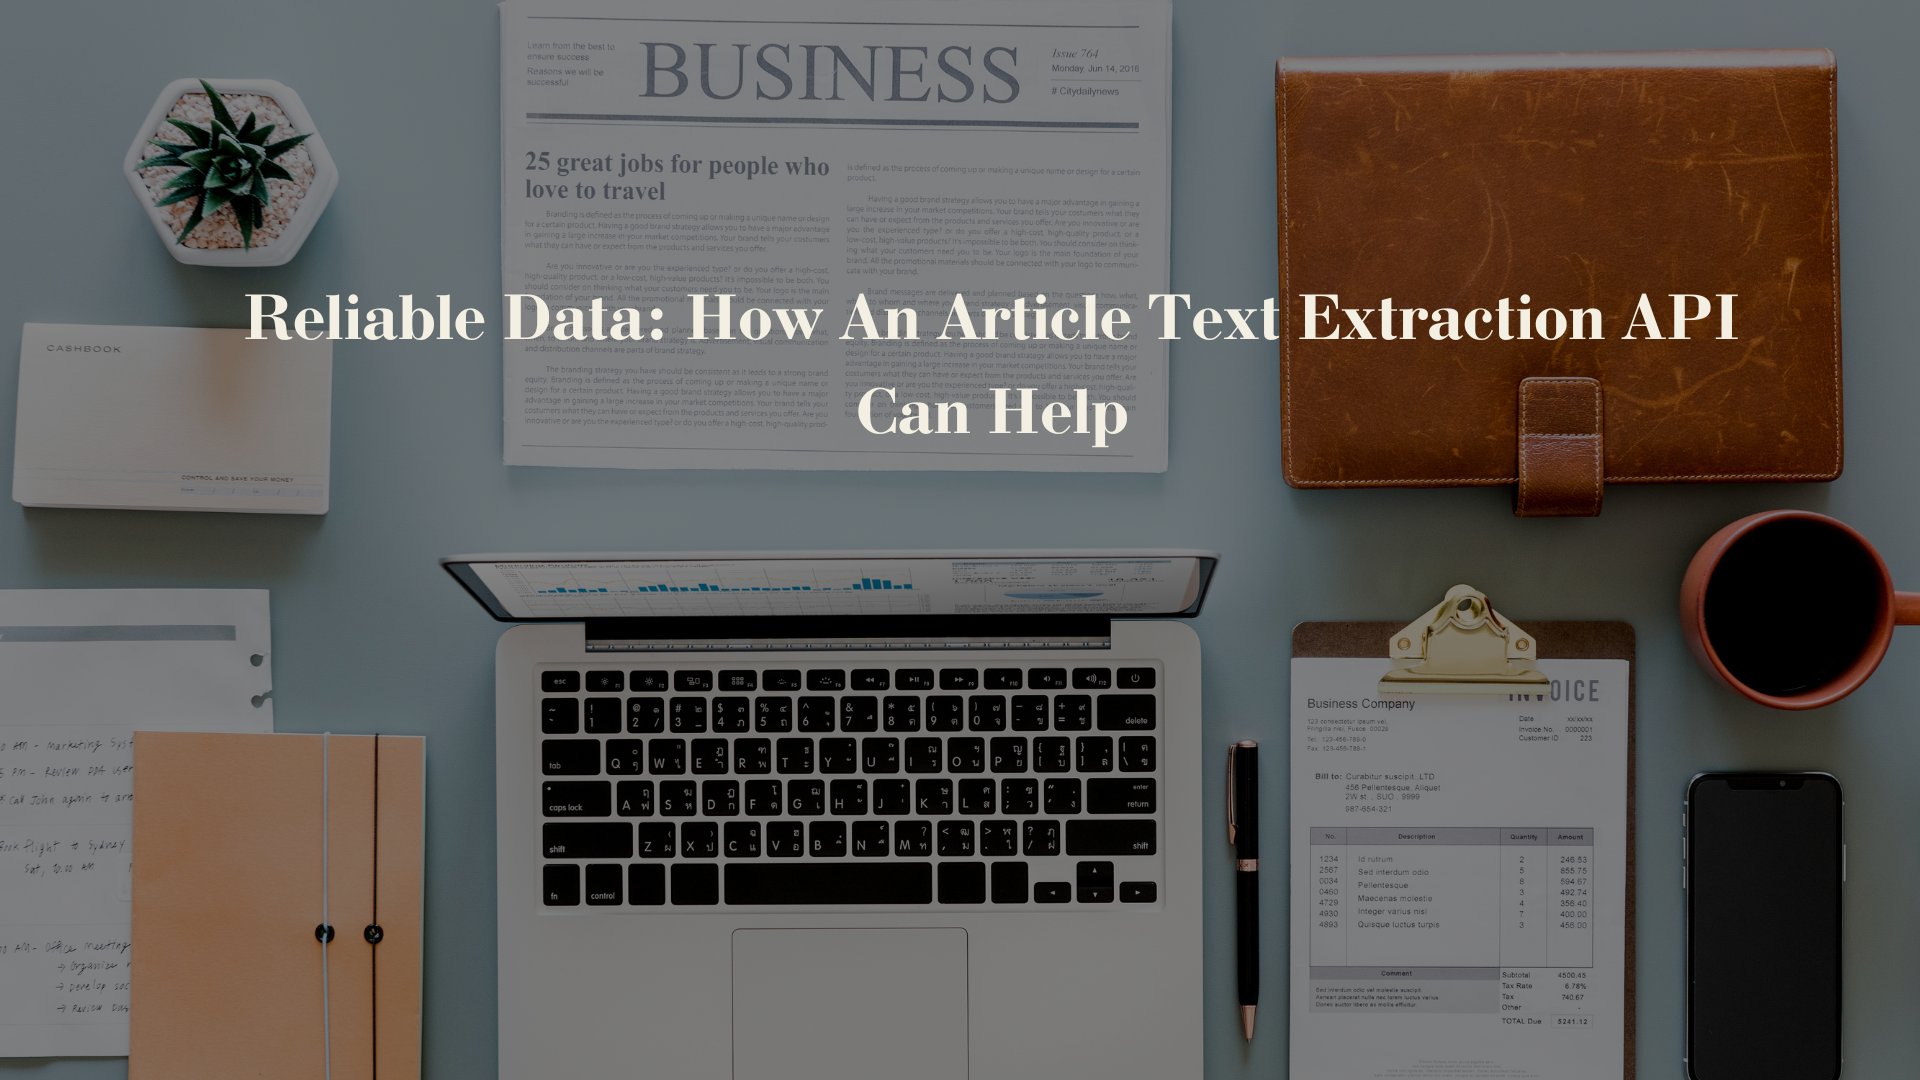 Reliable Data: How An Article Text Extraction API Can Help